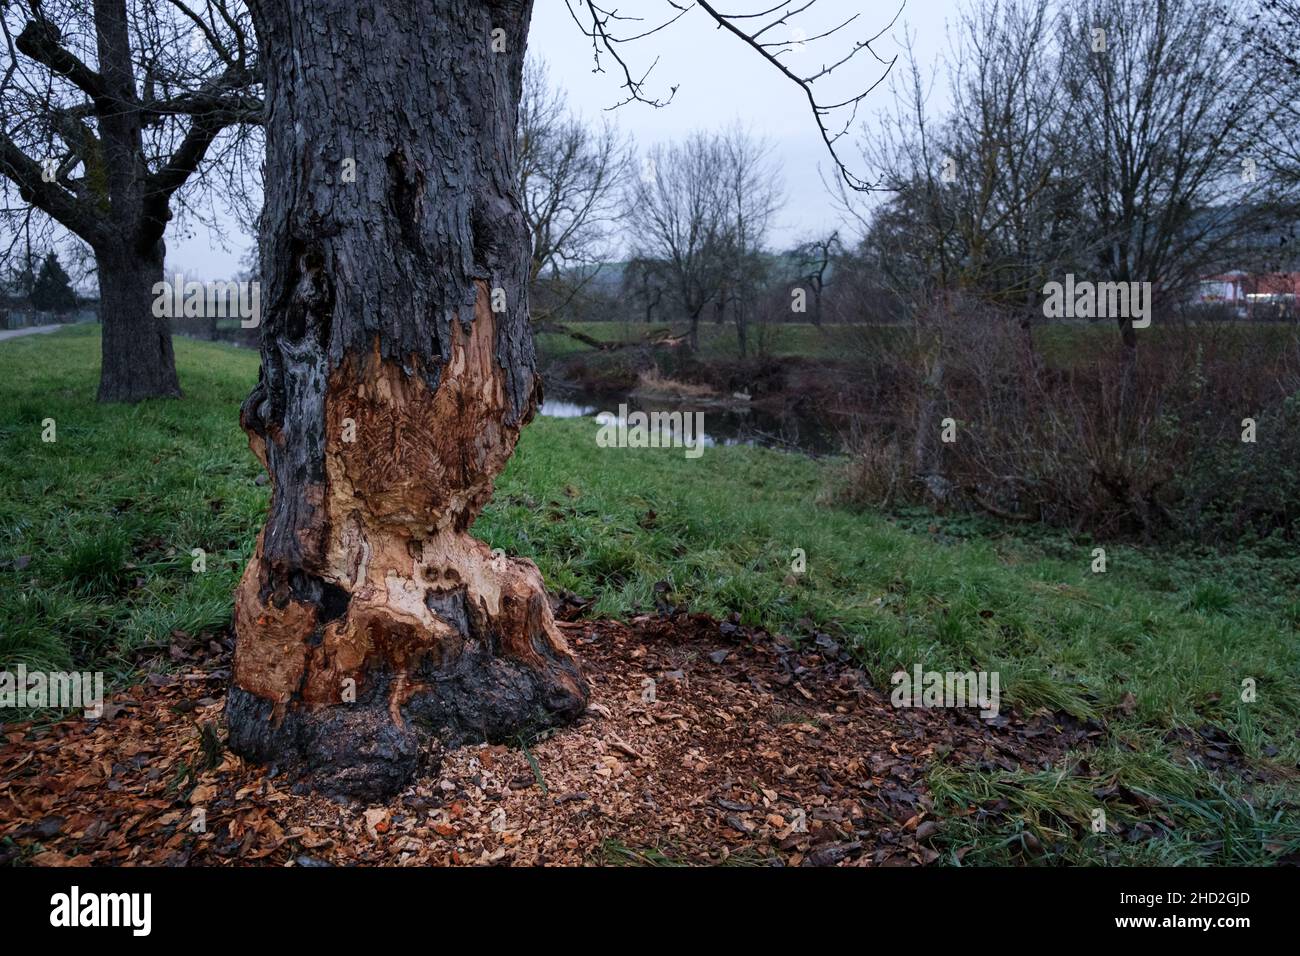 The Beaver is back in Germany and bite into the trees around the river Tauber. Stock Photo